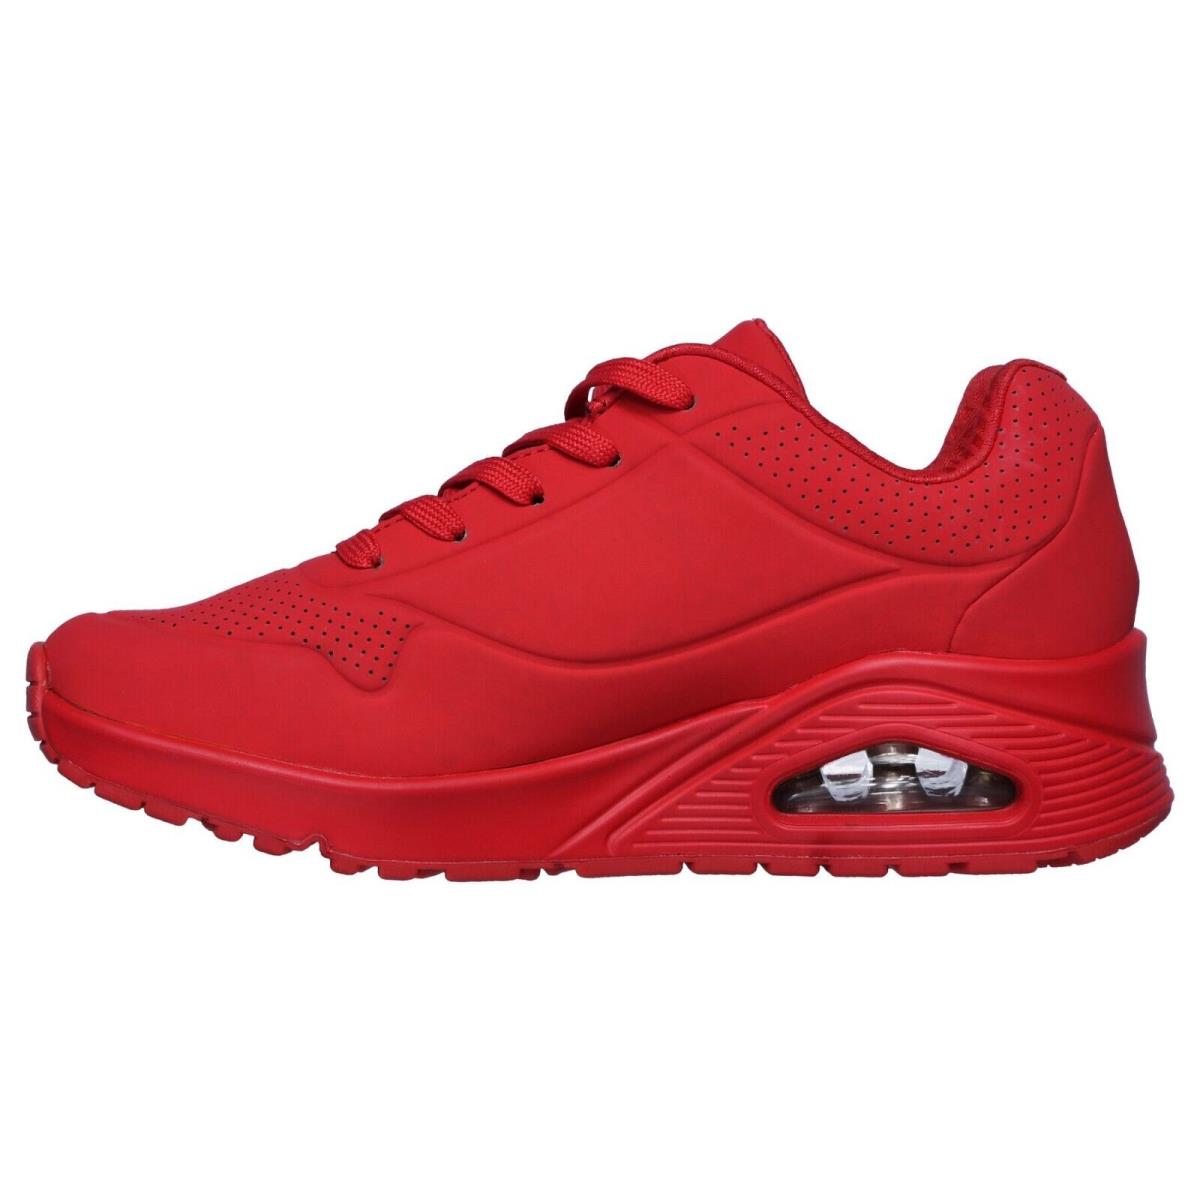 Skechers shoes  - Red 9